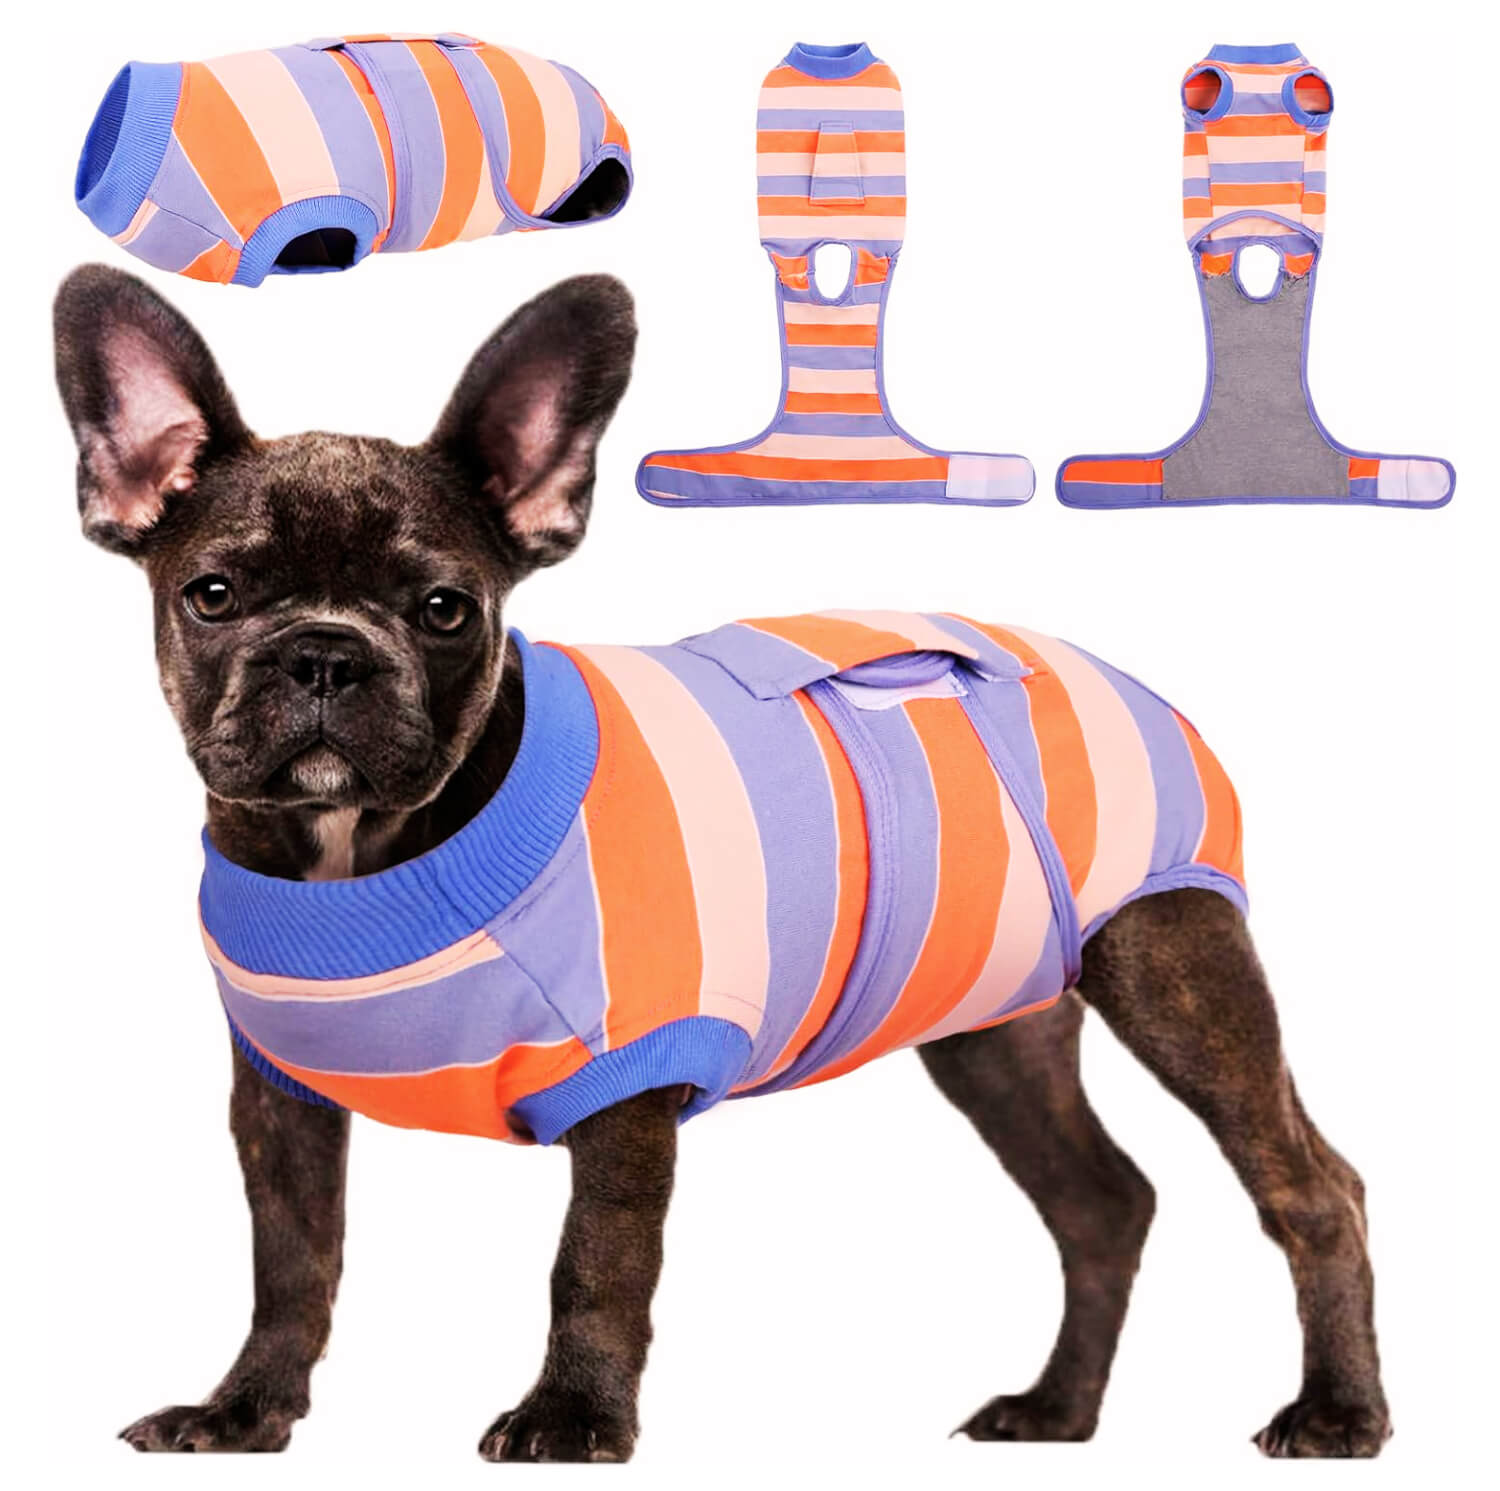 Kuoser Recovery Suit for Dogs